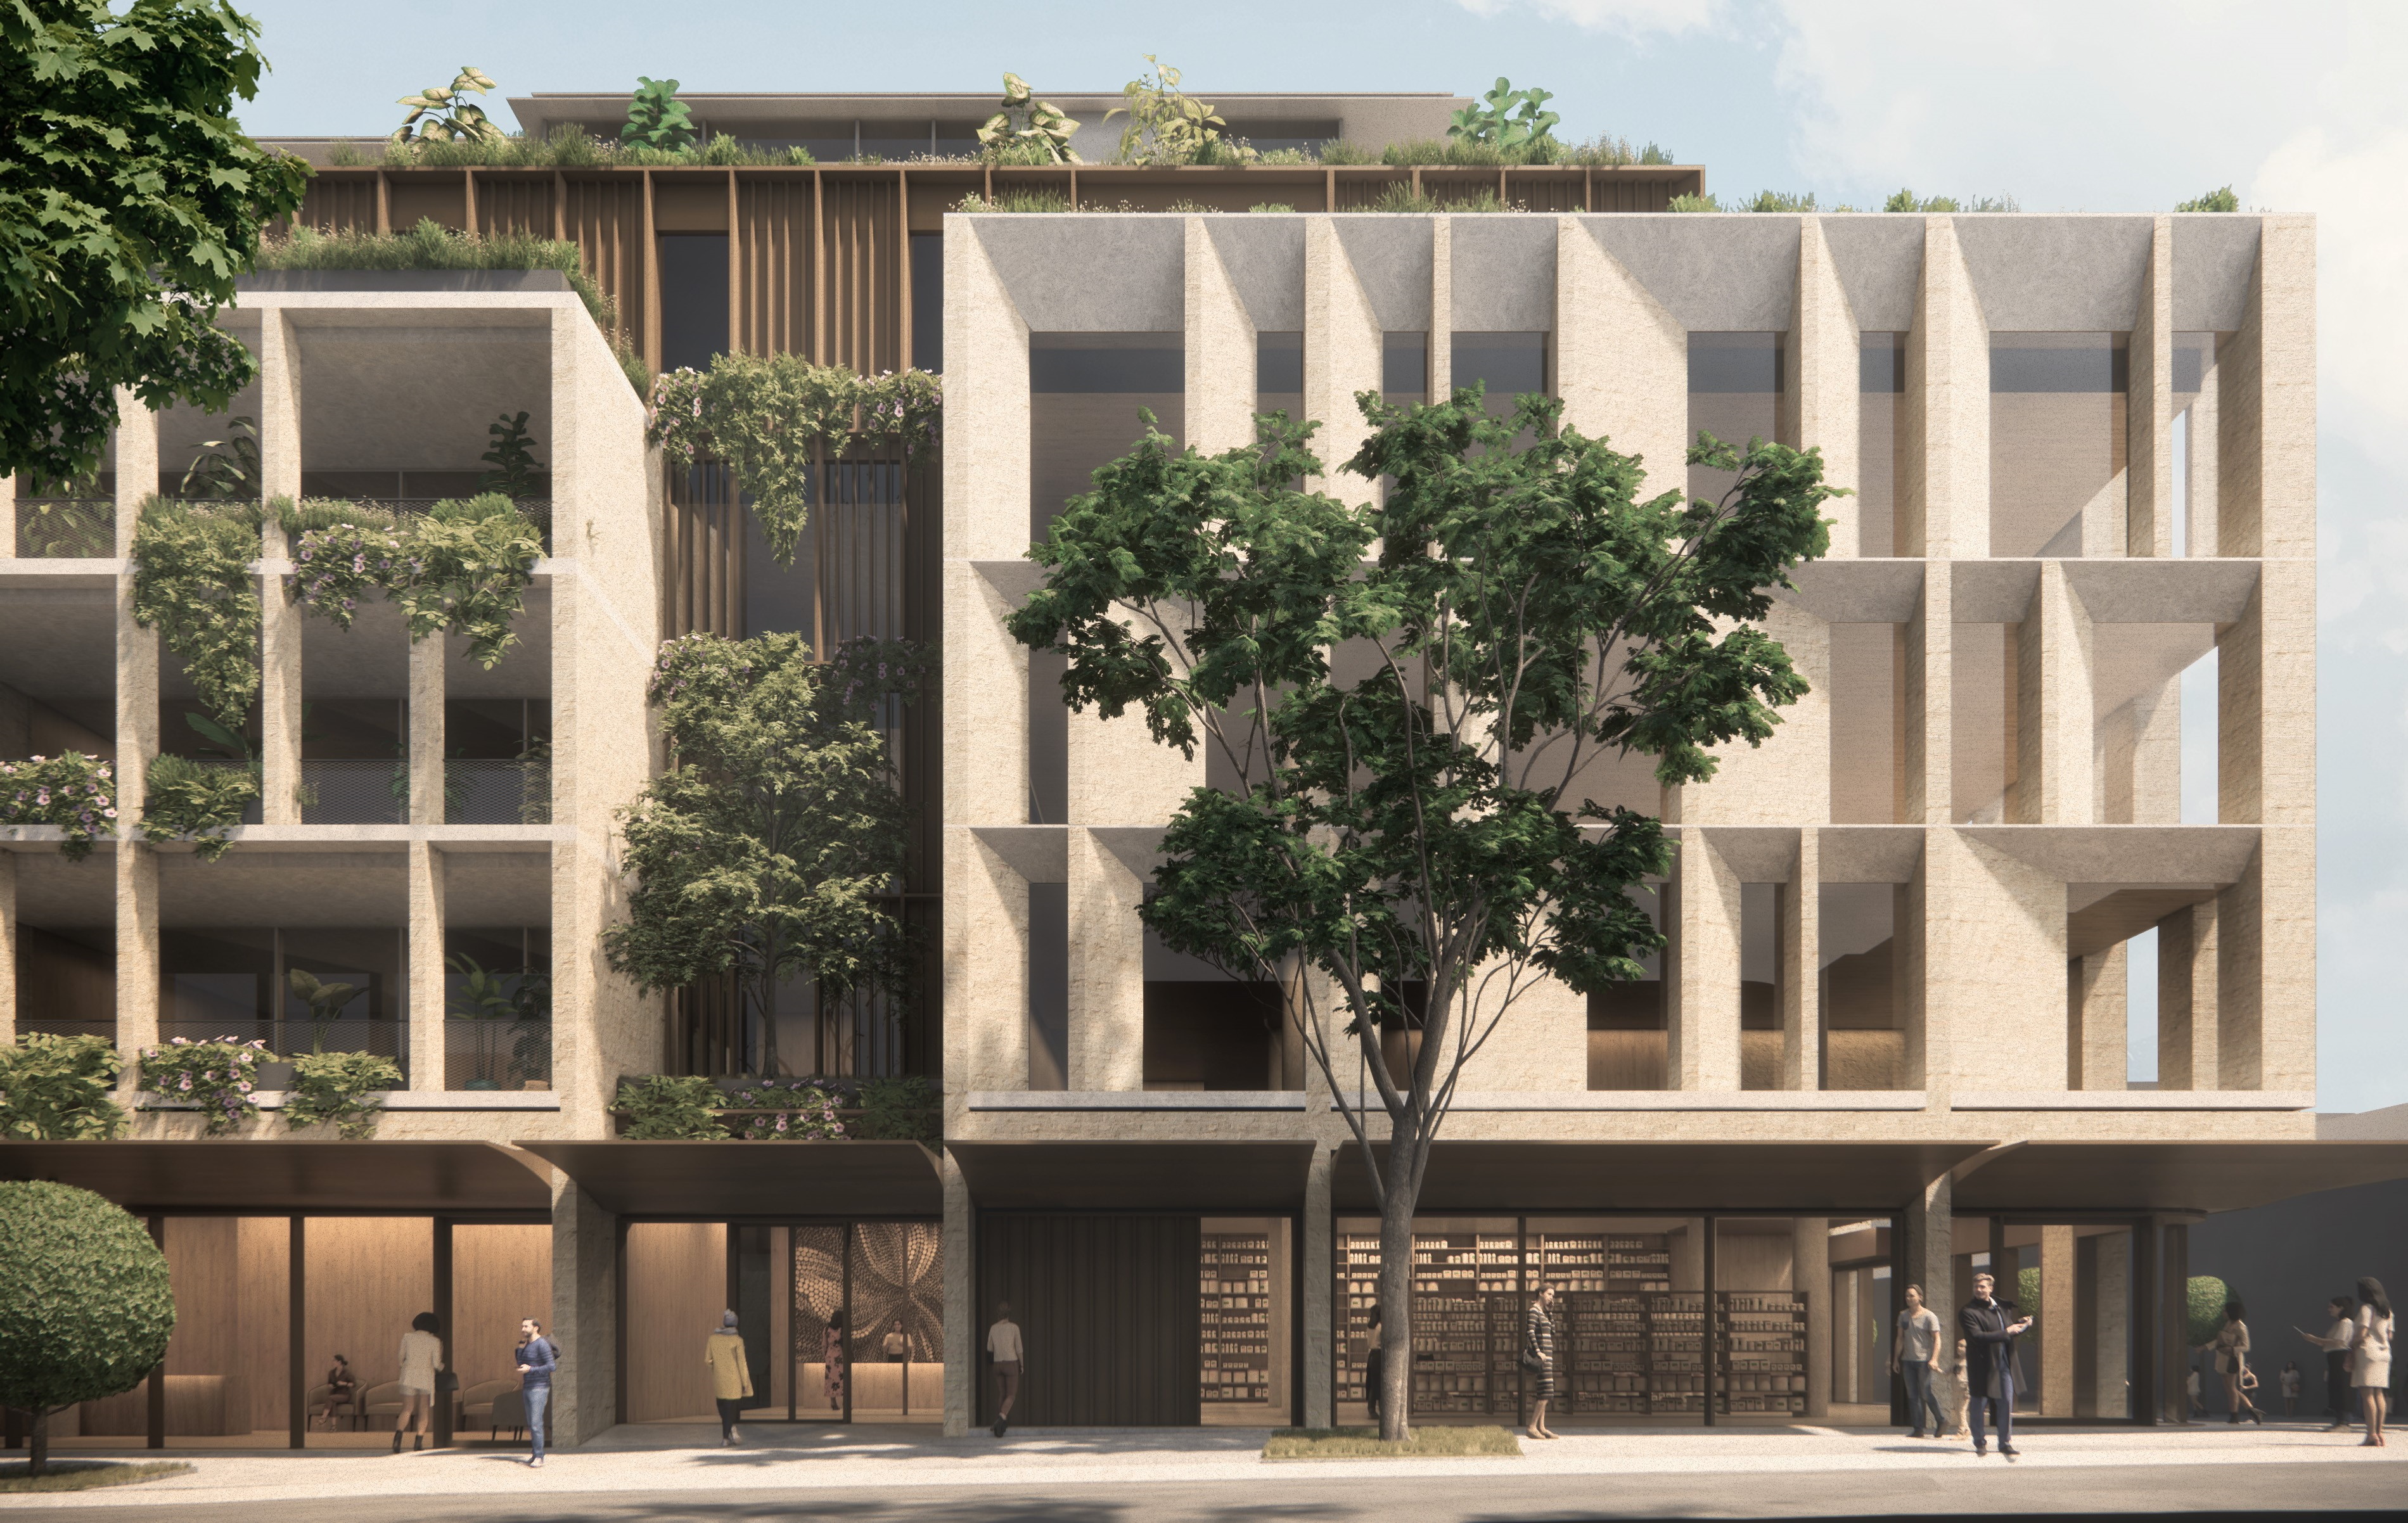 MaxCap and Orchard Piper partnership to help finance $120 million Toorak development